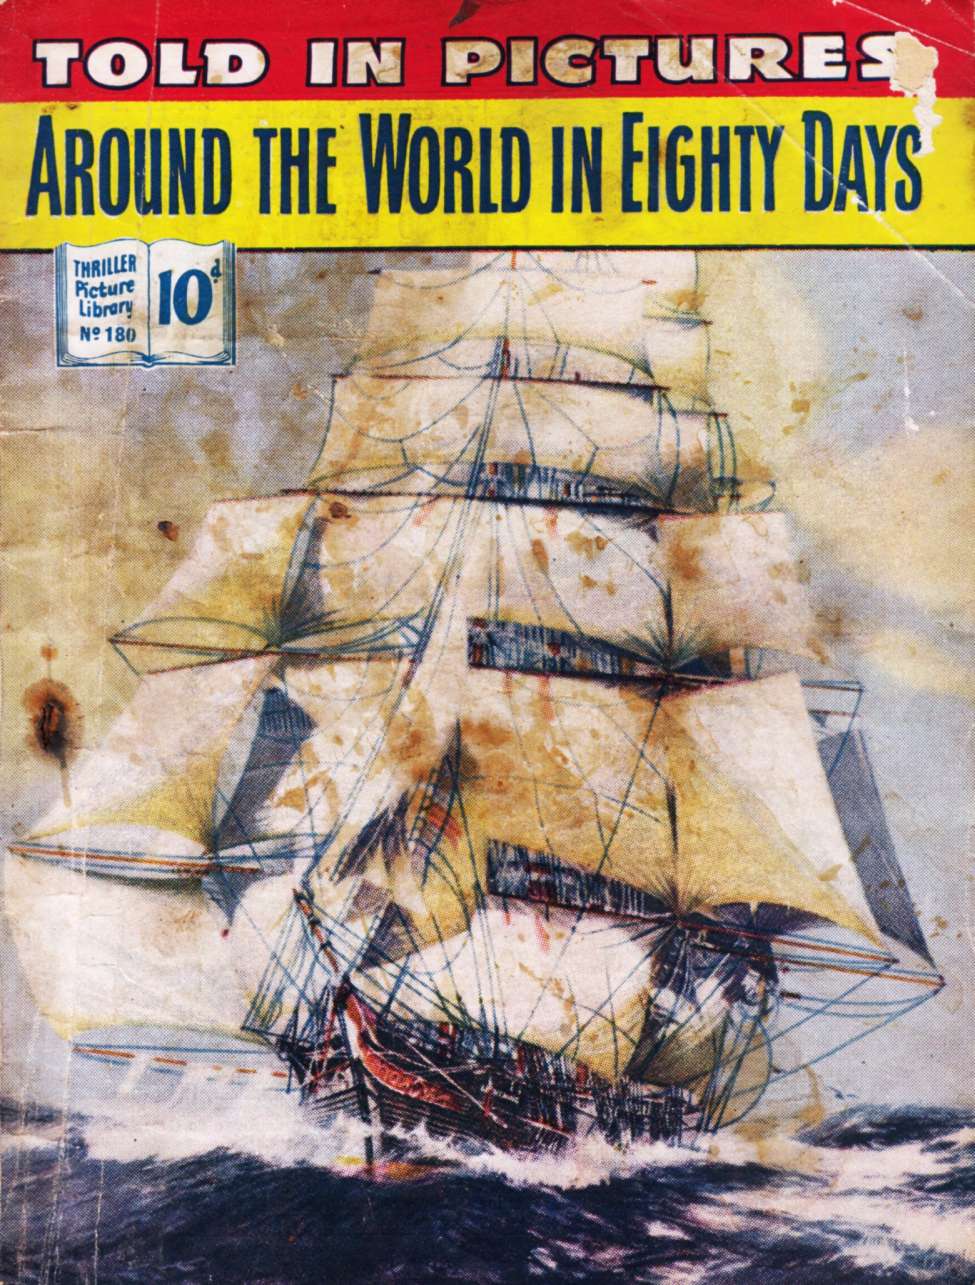 Book Cover For Thriller Picture Library 180 - Around the World in Eighty Days